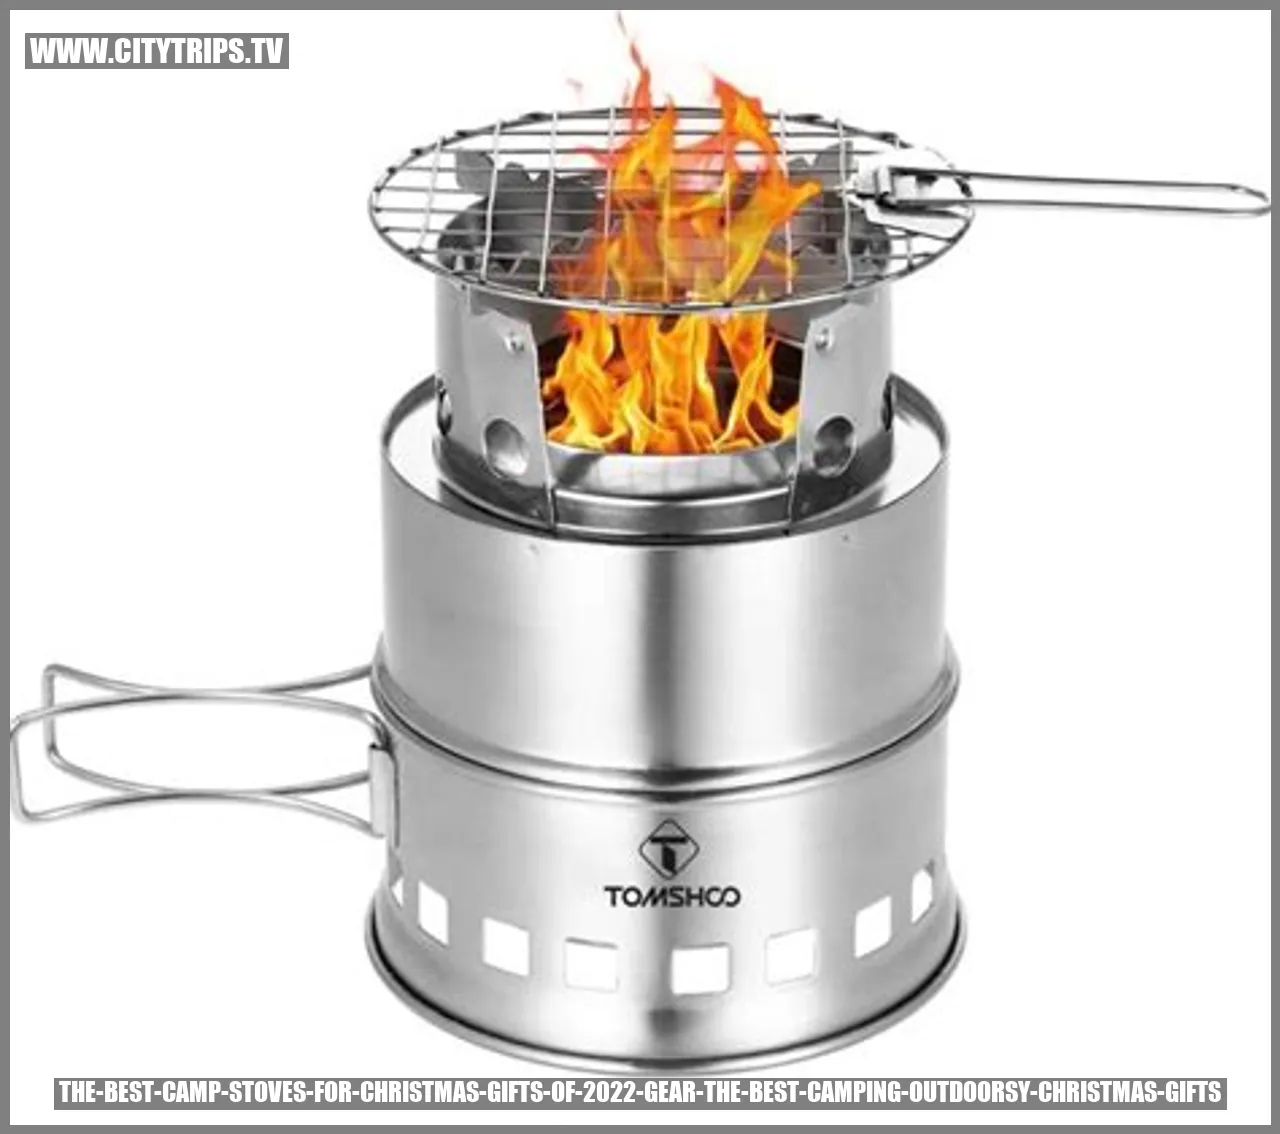 The Best Camp Stoves for Christmas Gifts of 2022